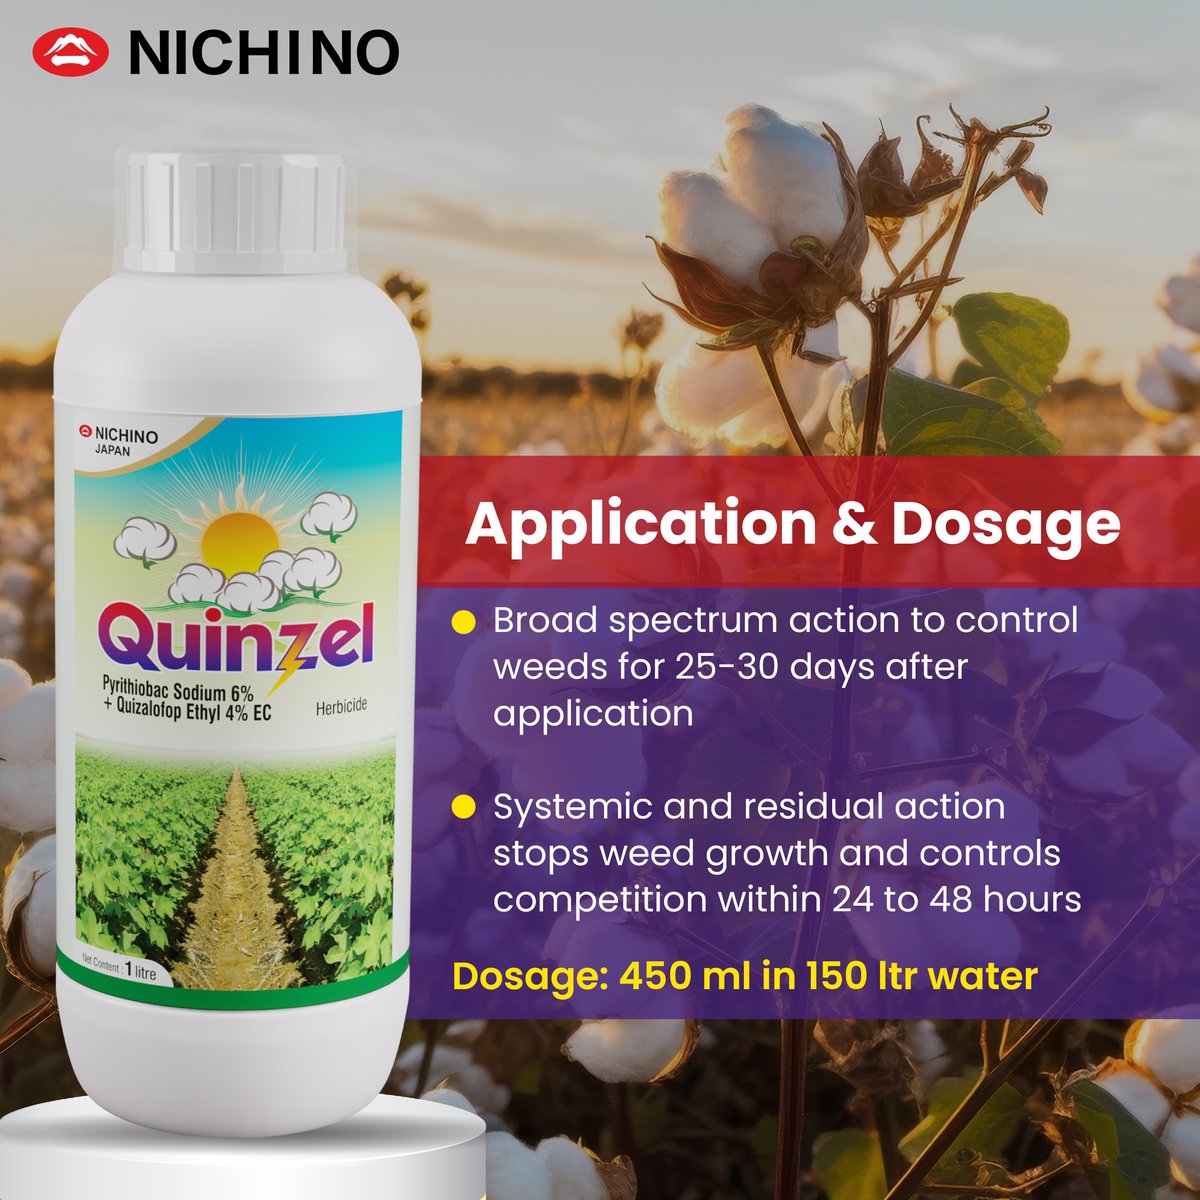 Maximise your crop yield with Quinzel, effective, reliable and farmer-approved!
#quinzel #cropdefence #cropsafety #nichinoindia